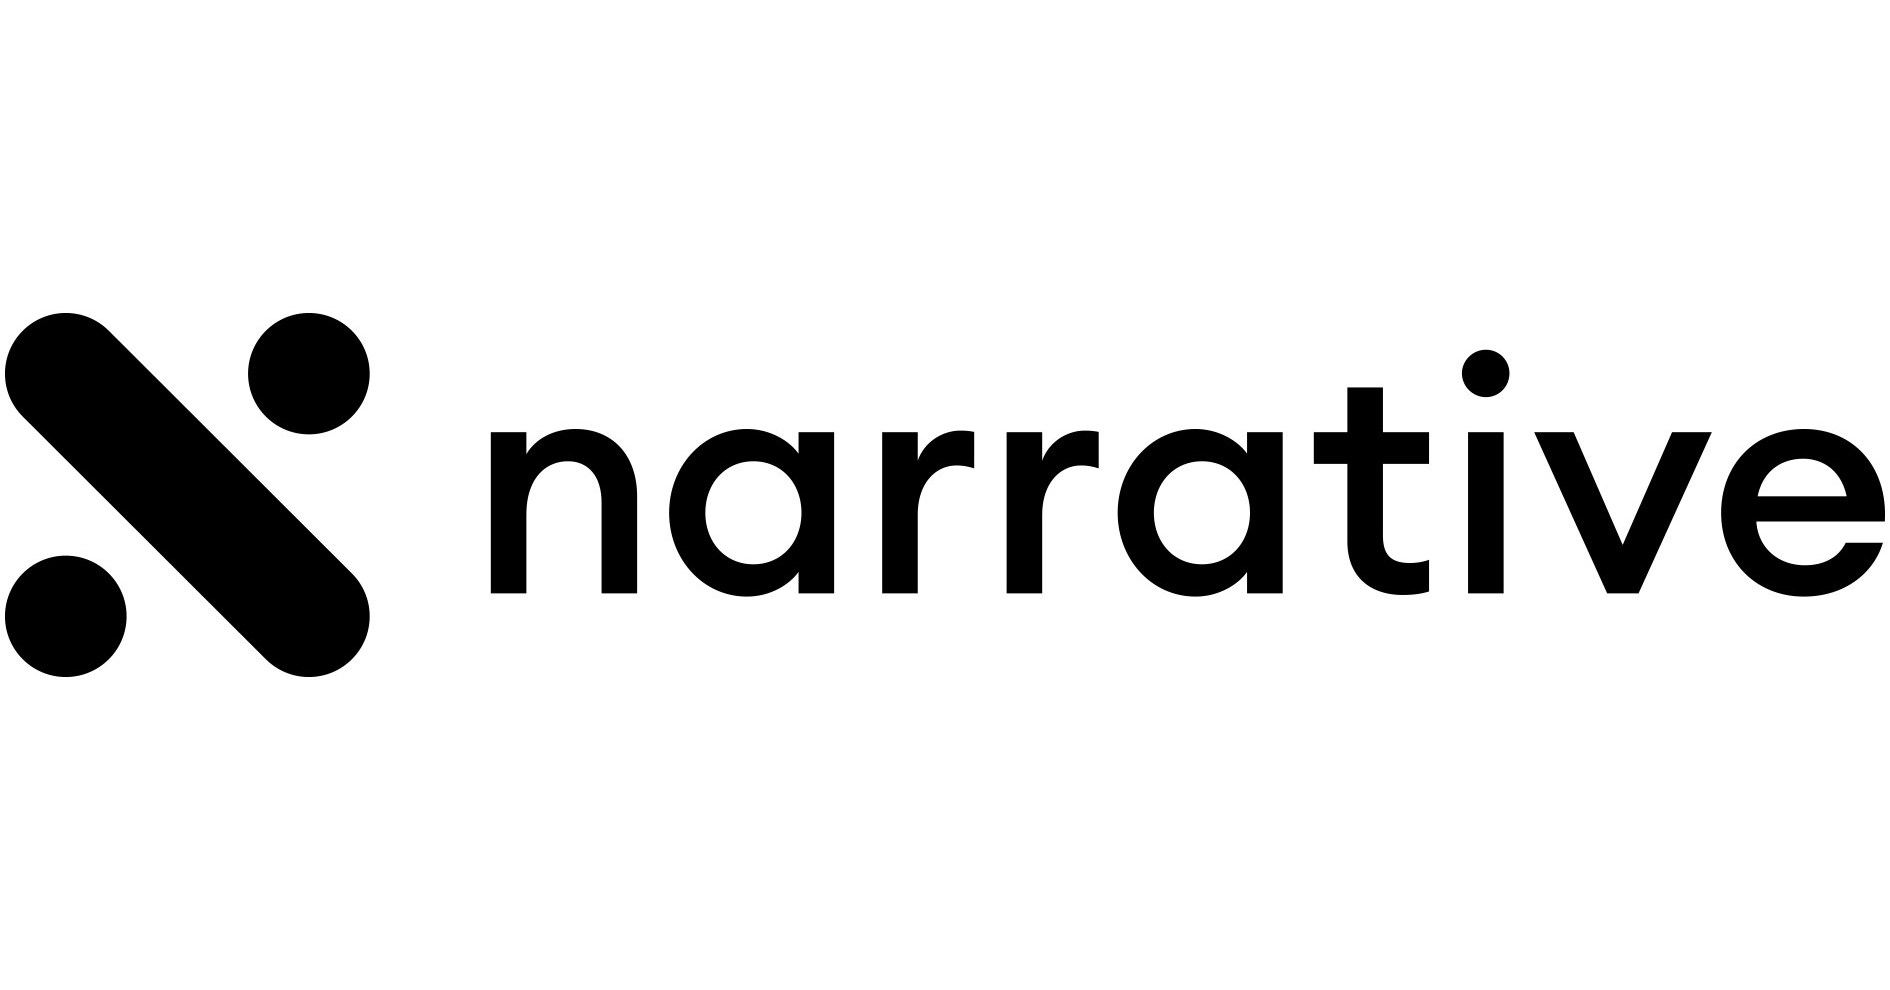 Claritas consumer data now available on Narrative’s data streaming platform